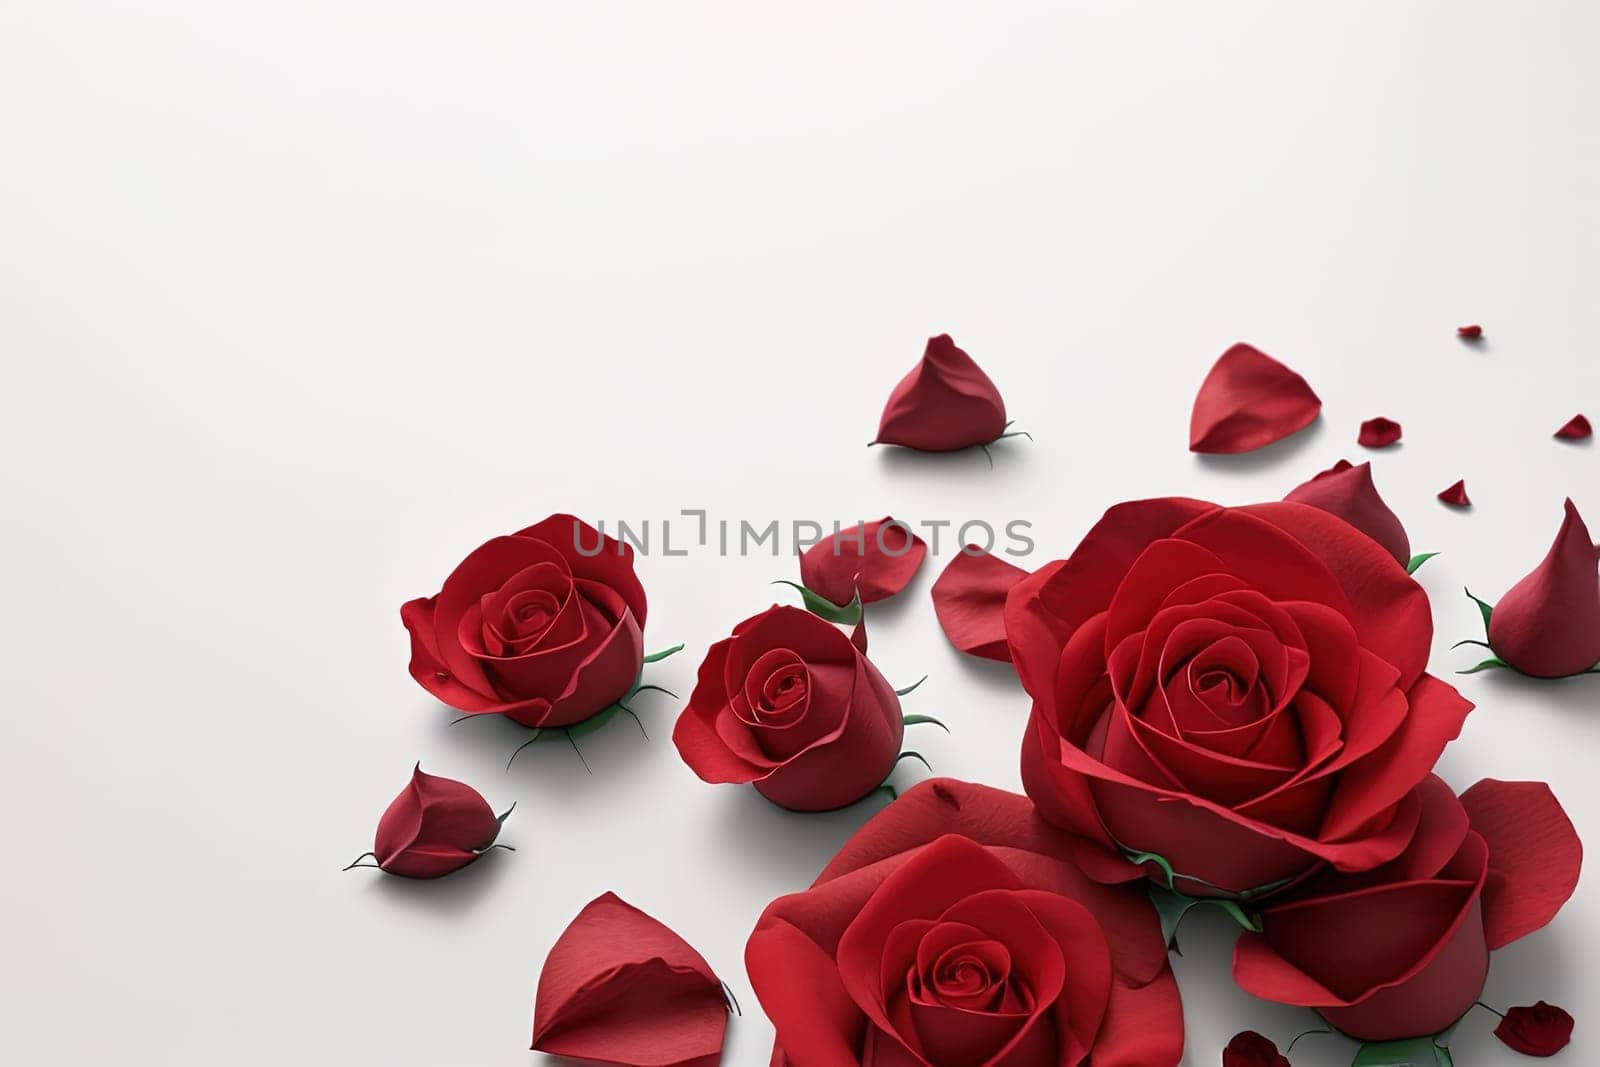 Red roses and rose petals on white background by macroarting